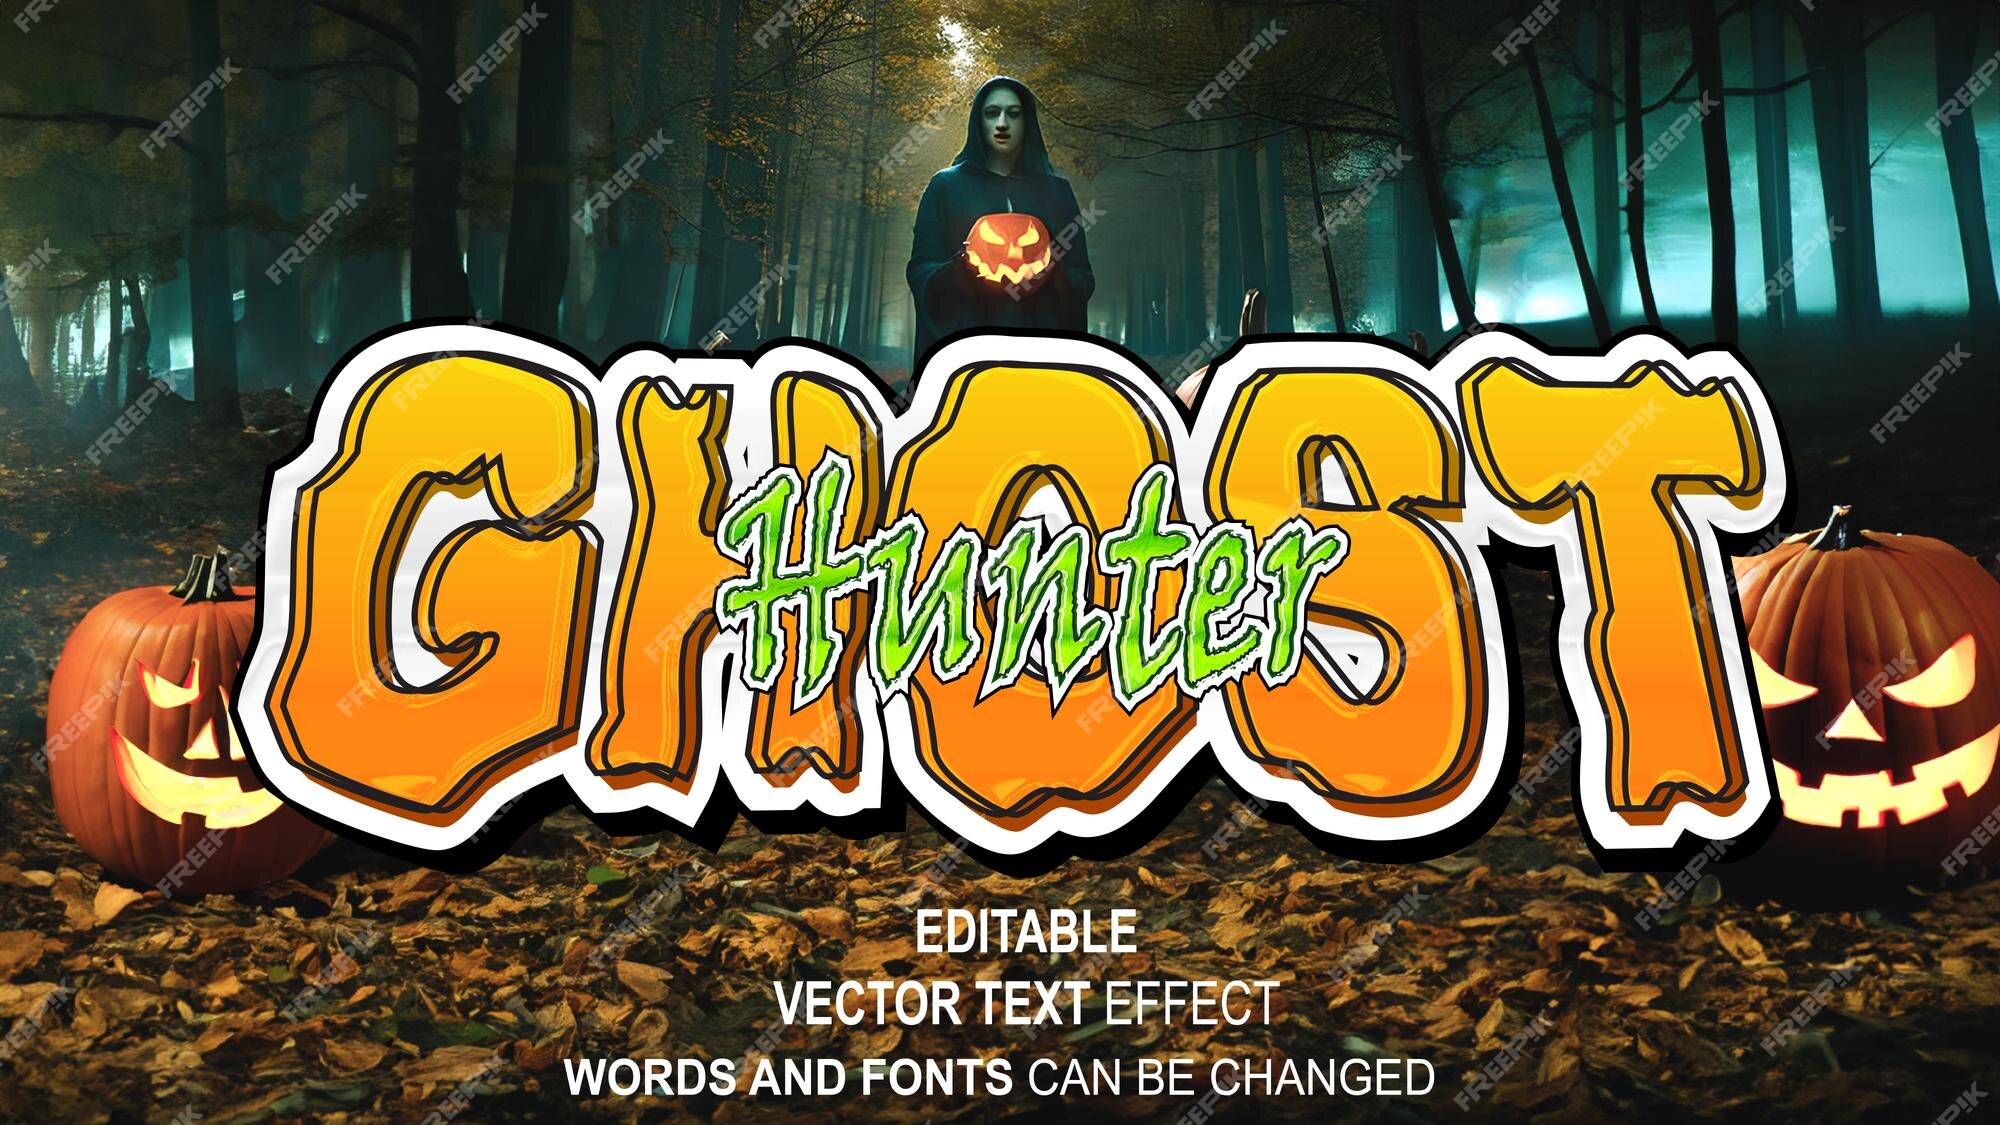 Halloween cool text animation effect maker engfto. by xggs on